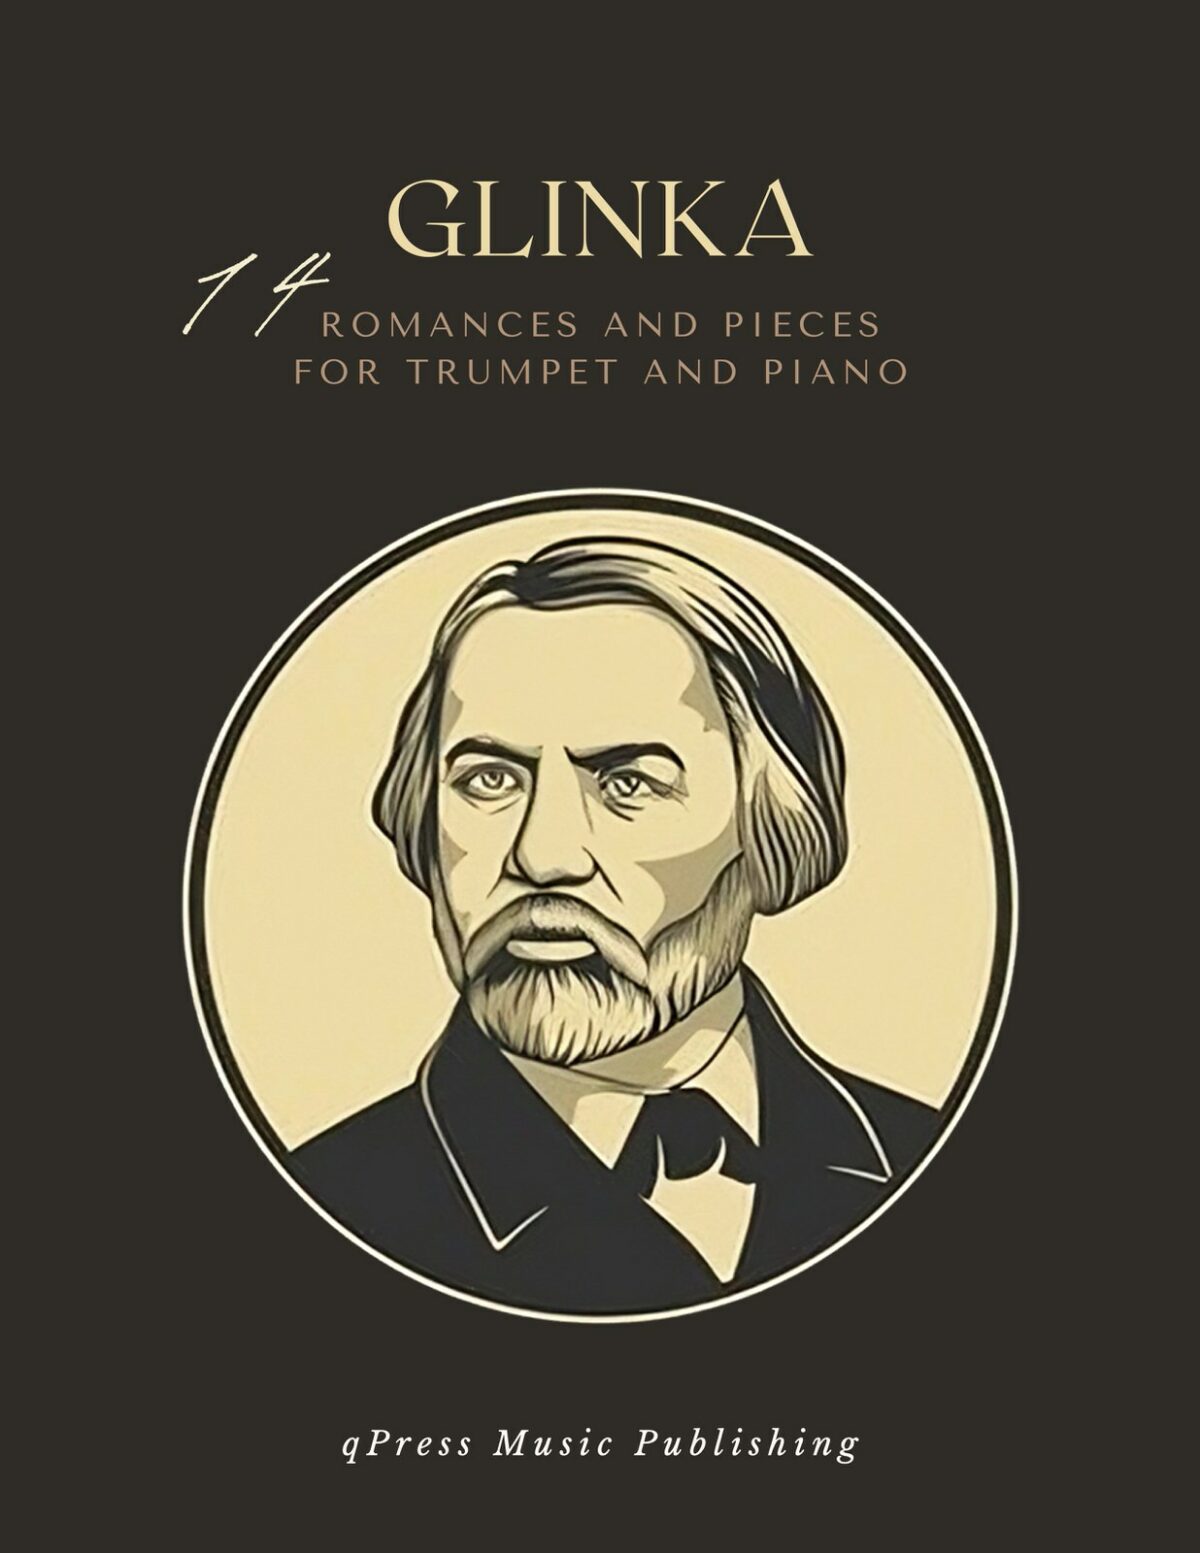 Glinka, Romances and Pieces for Trumpet and Piano-p01